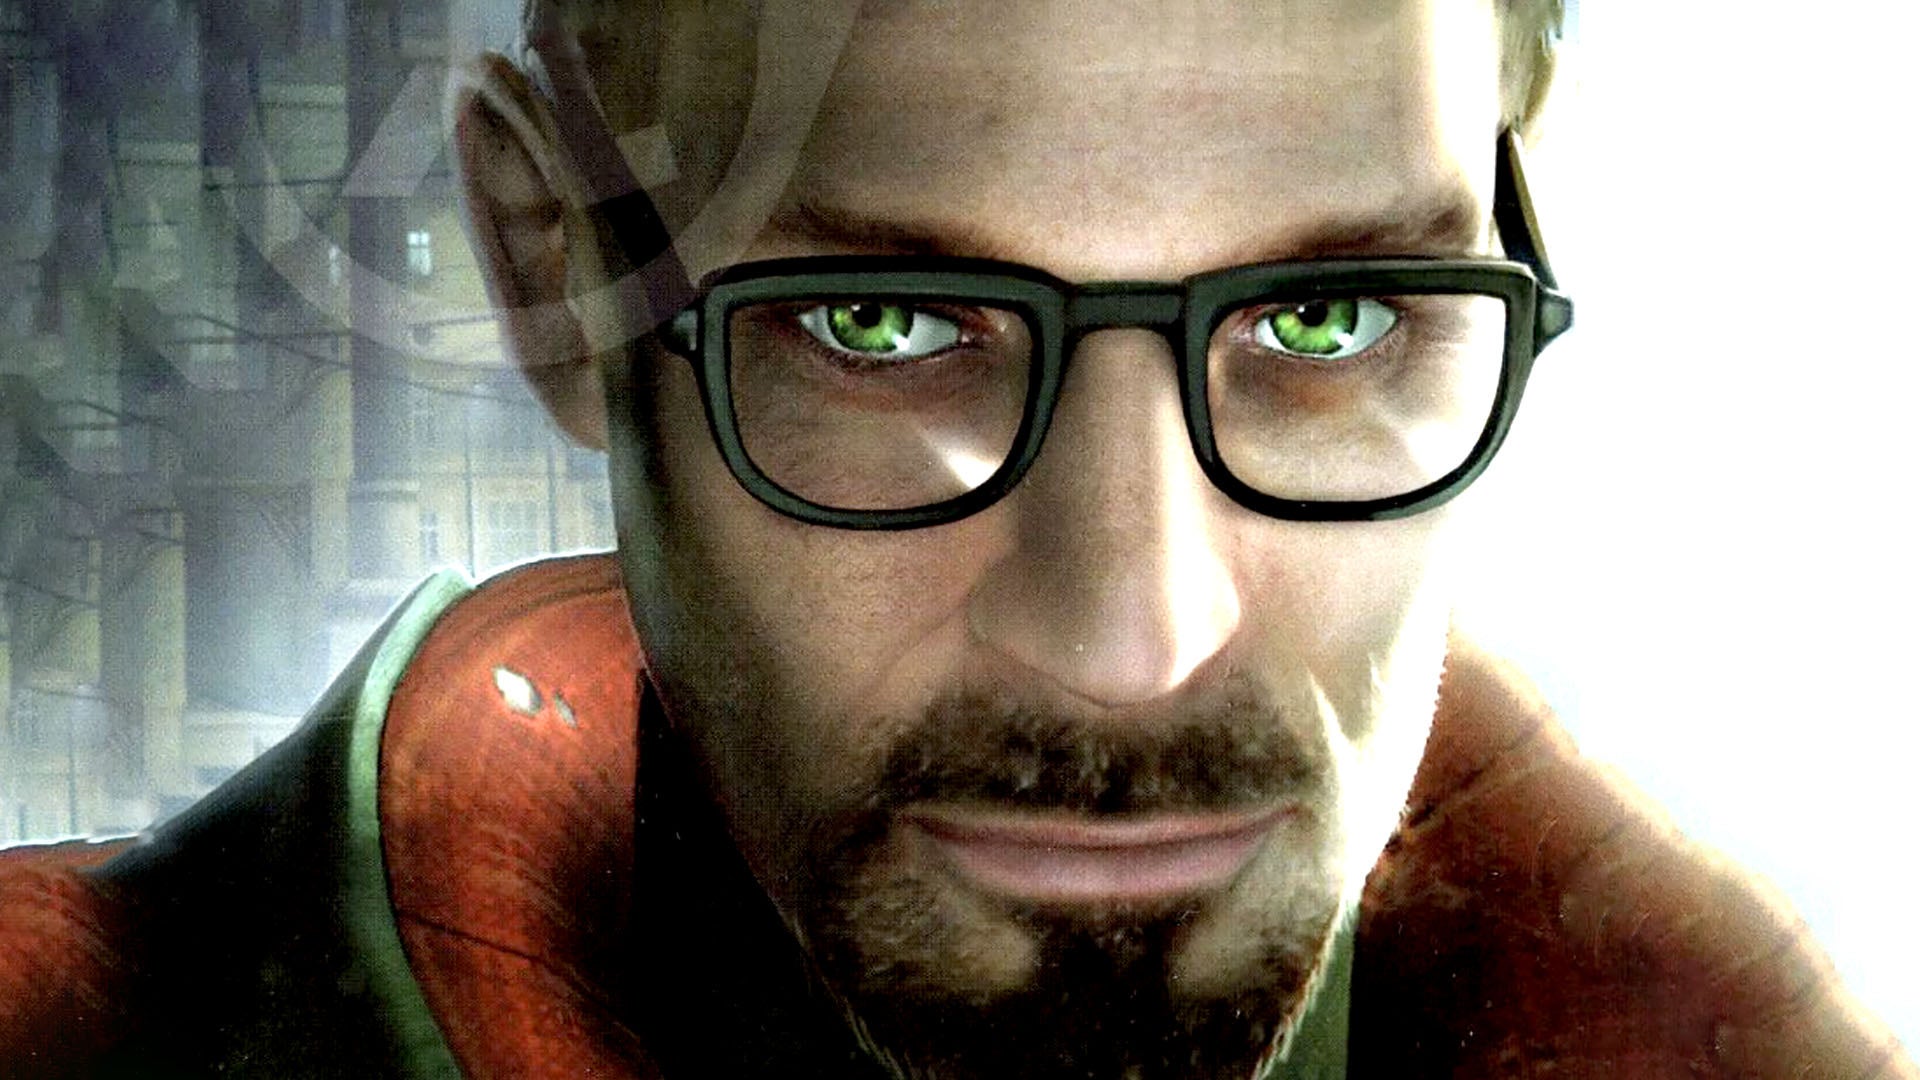 Image for Half-Life 2: Retro PC Time Capsule vs PlayStation 3 vs OG Xbox - Need We Say More?